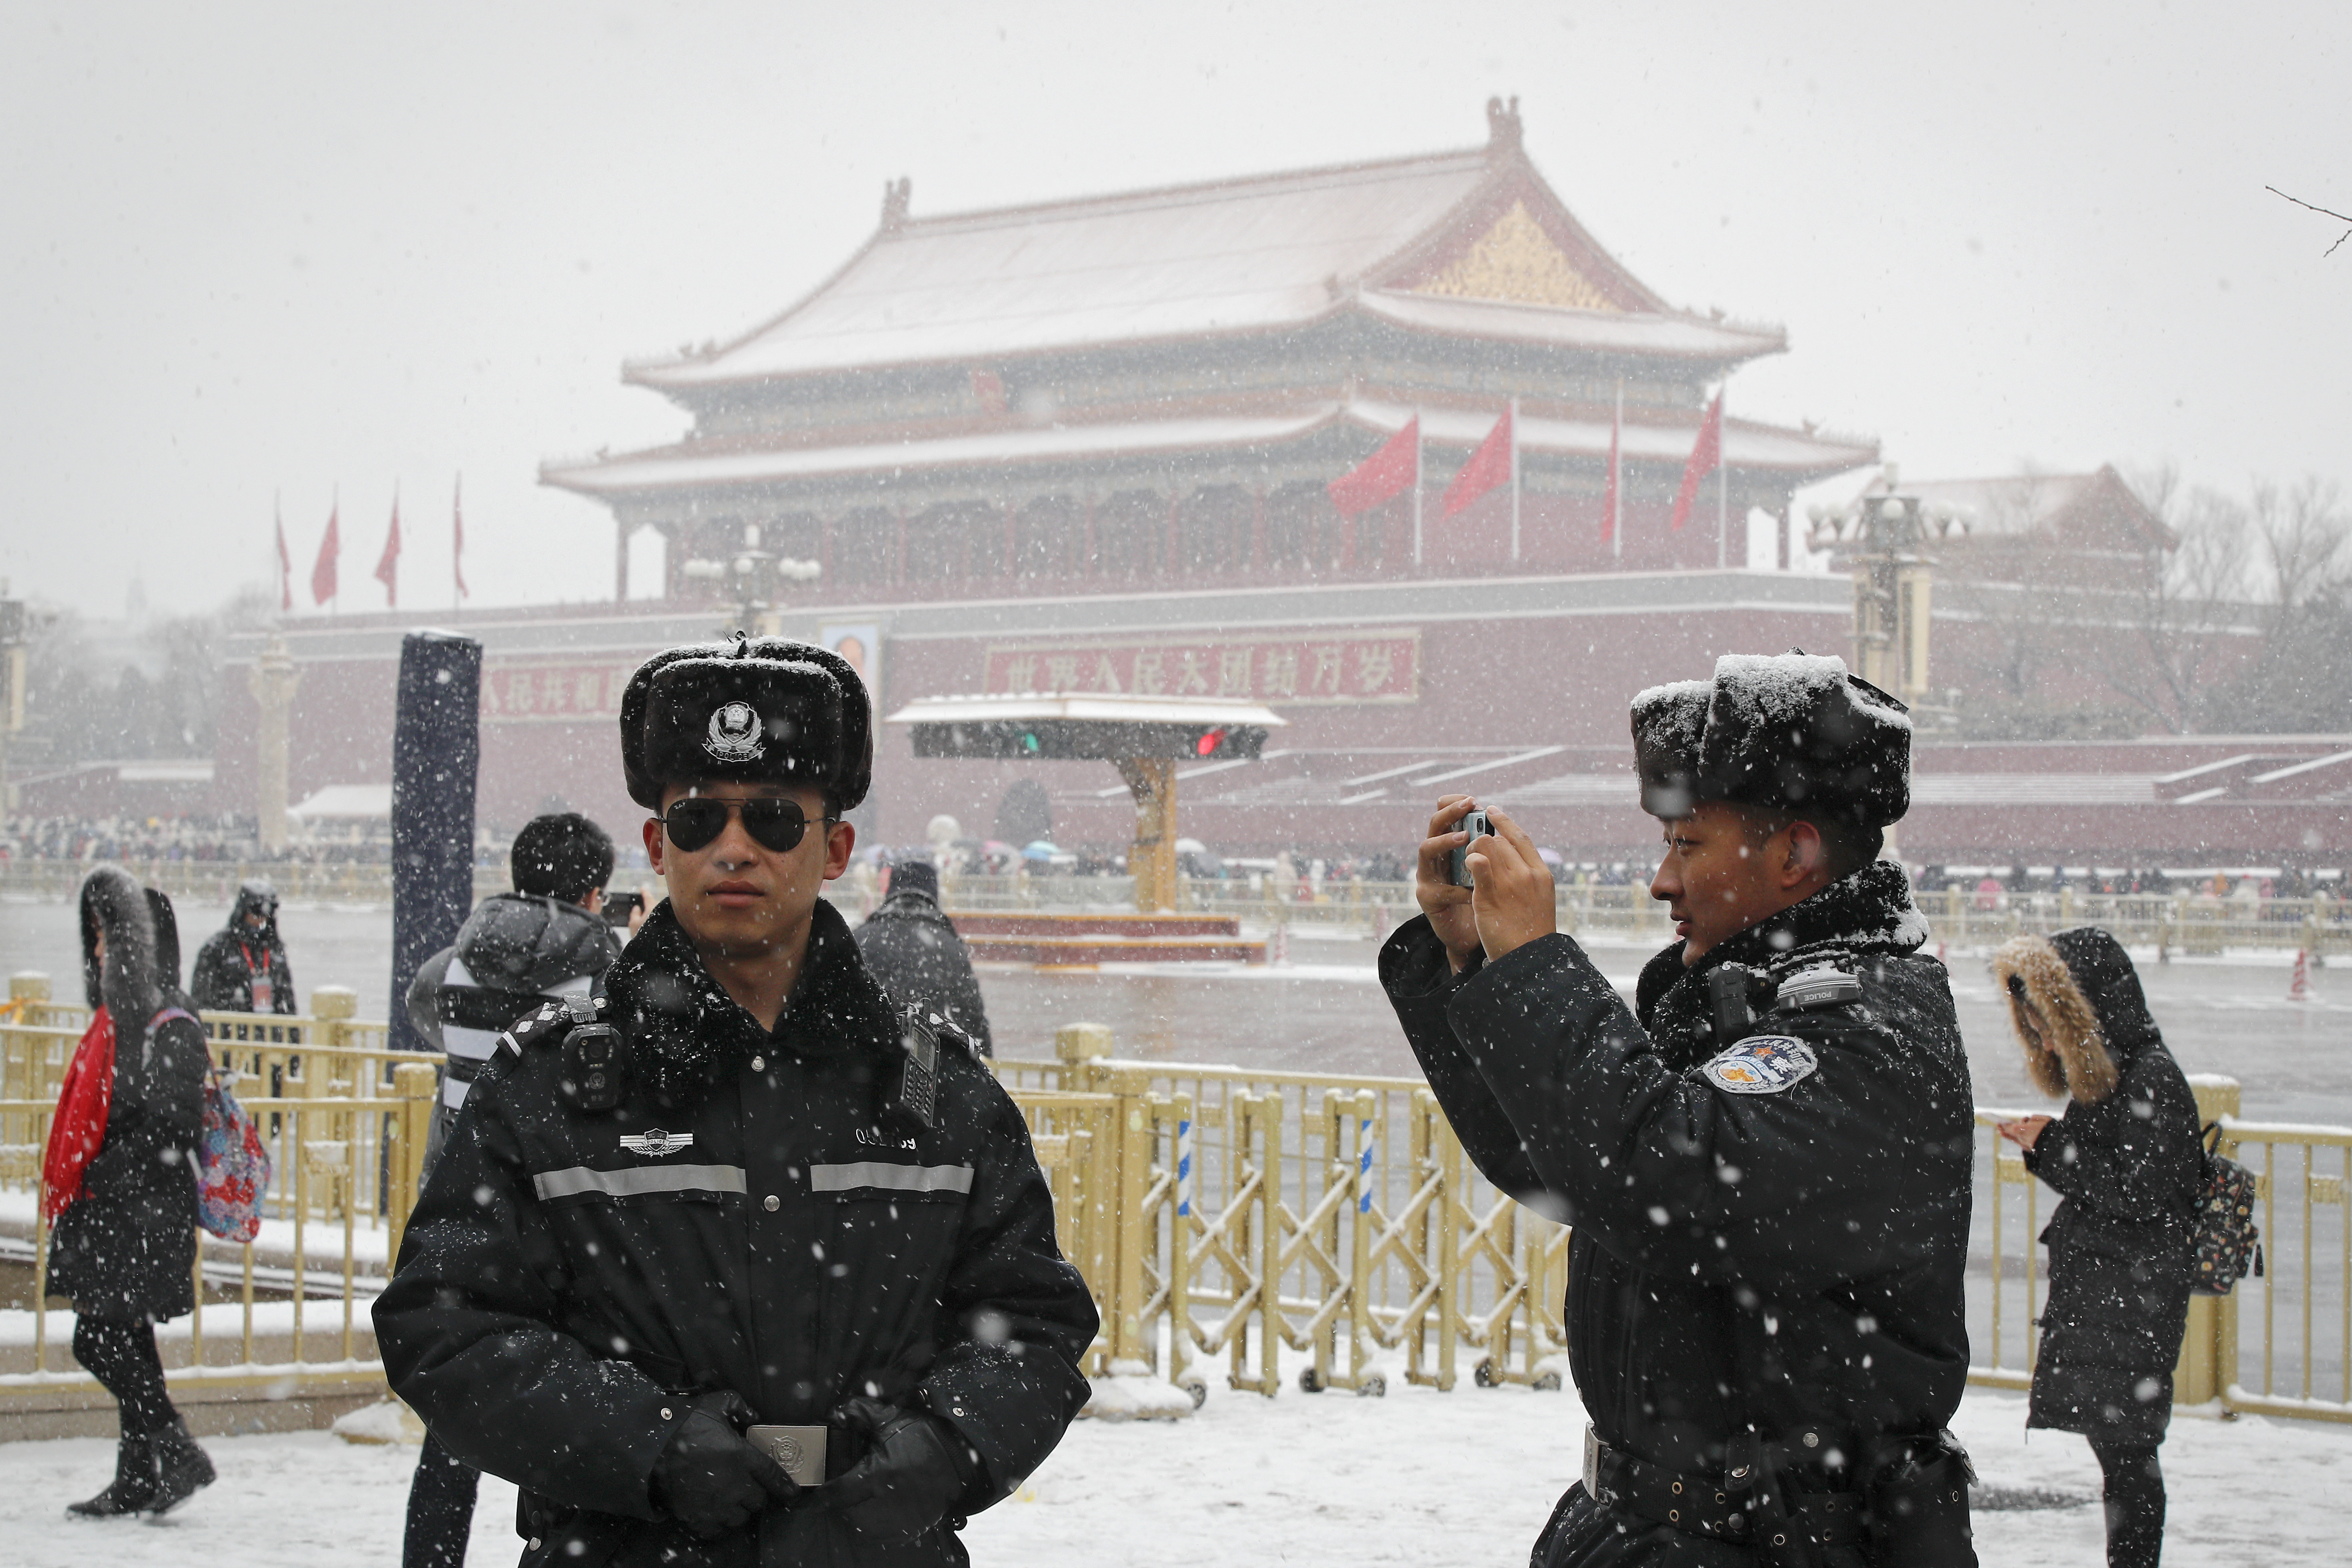 A policeman takes a photo of his colleague against Tiananmen Gate as snow falls in Beijing, Tuesday, Feb. 12, 2019. China's capital is mostly dry in the winter but a storm system brought snow to the city on Tuesday morning. (AP Photo/Andy Wong)